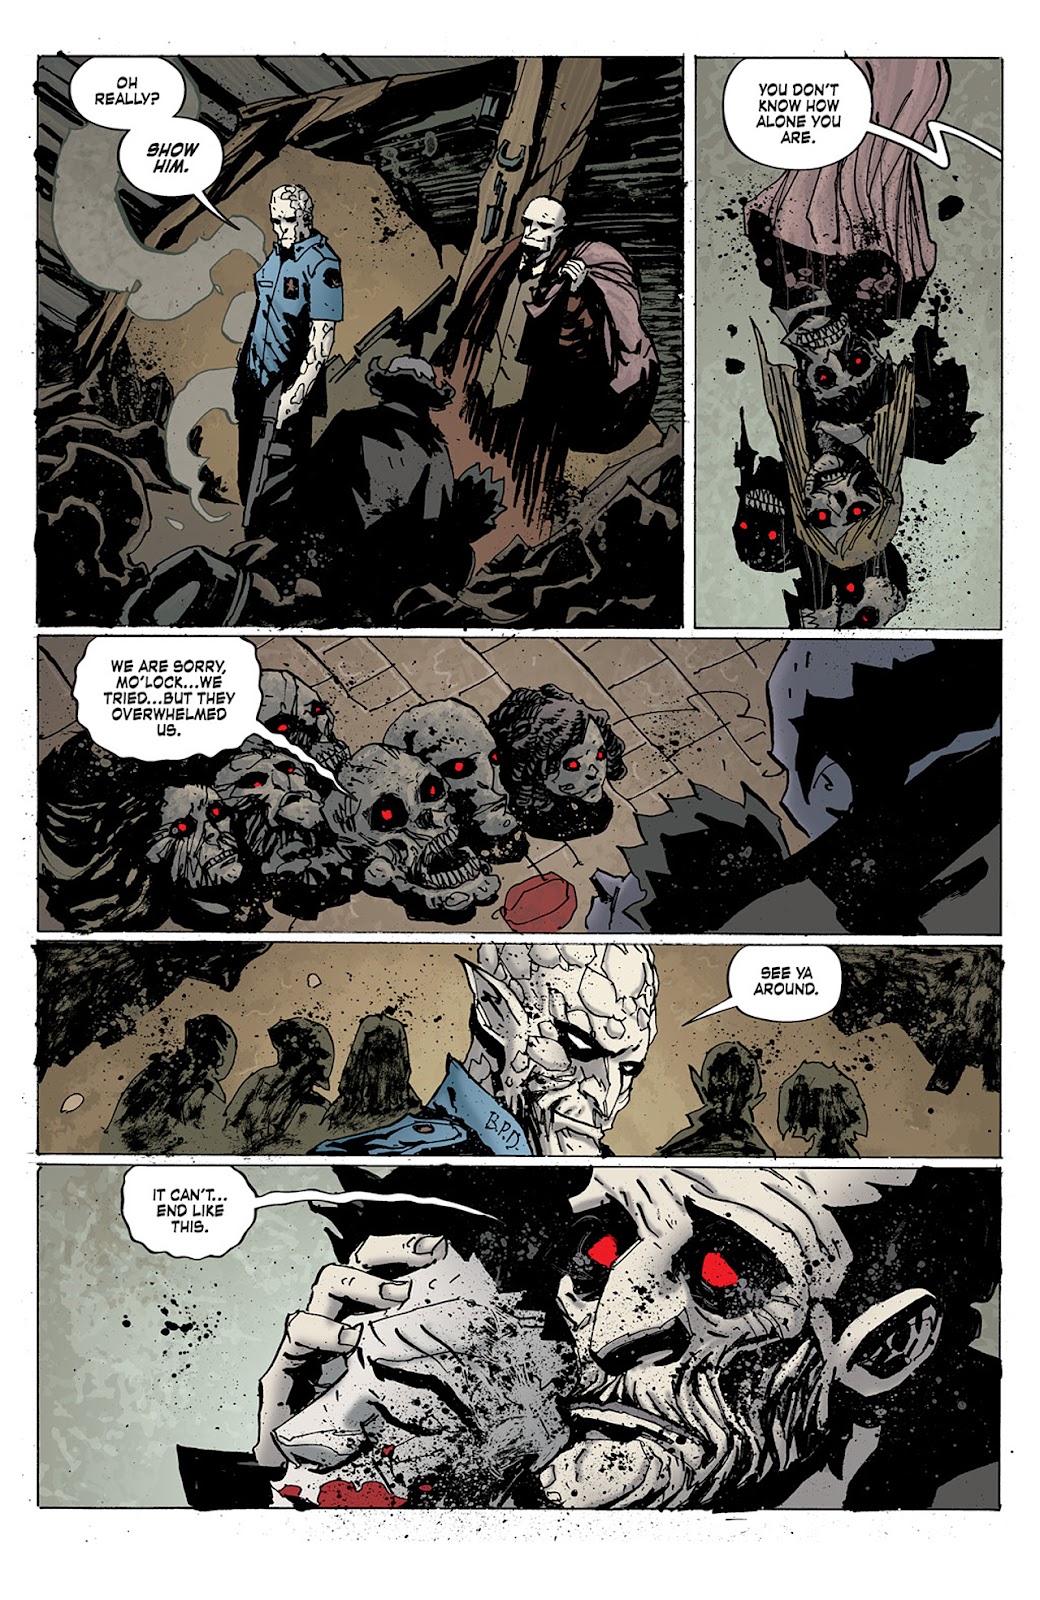 Criminal Macabre: Final Night - The 30 Days of Night Crossover issue 3 - Page 20